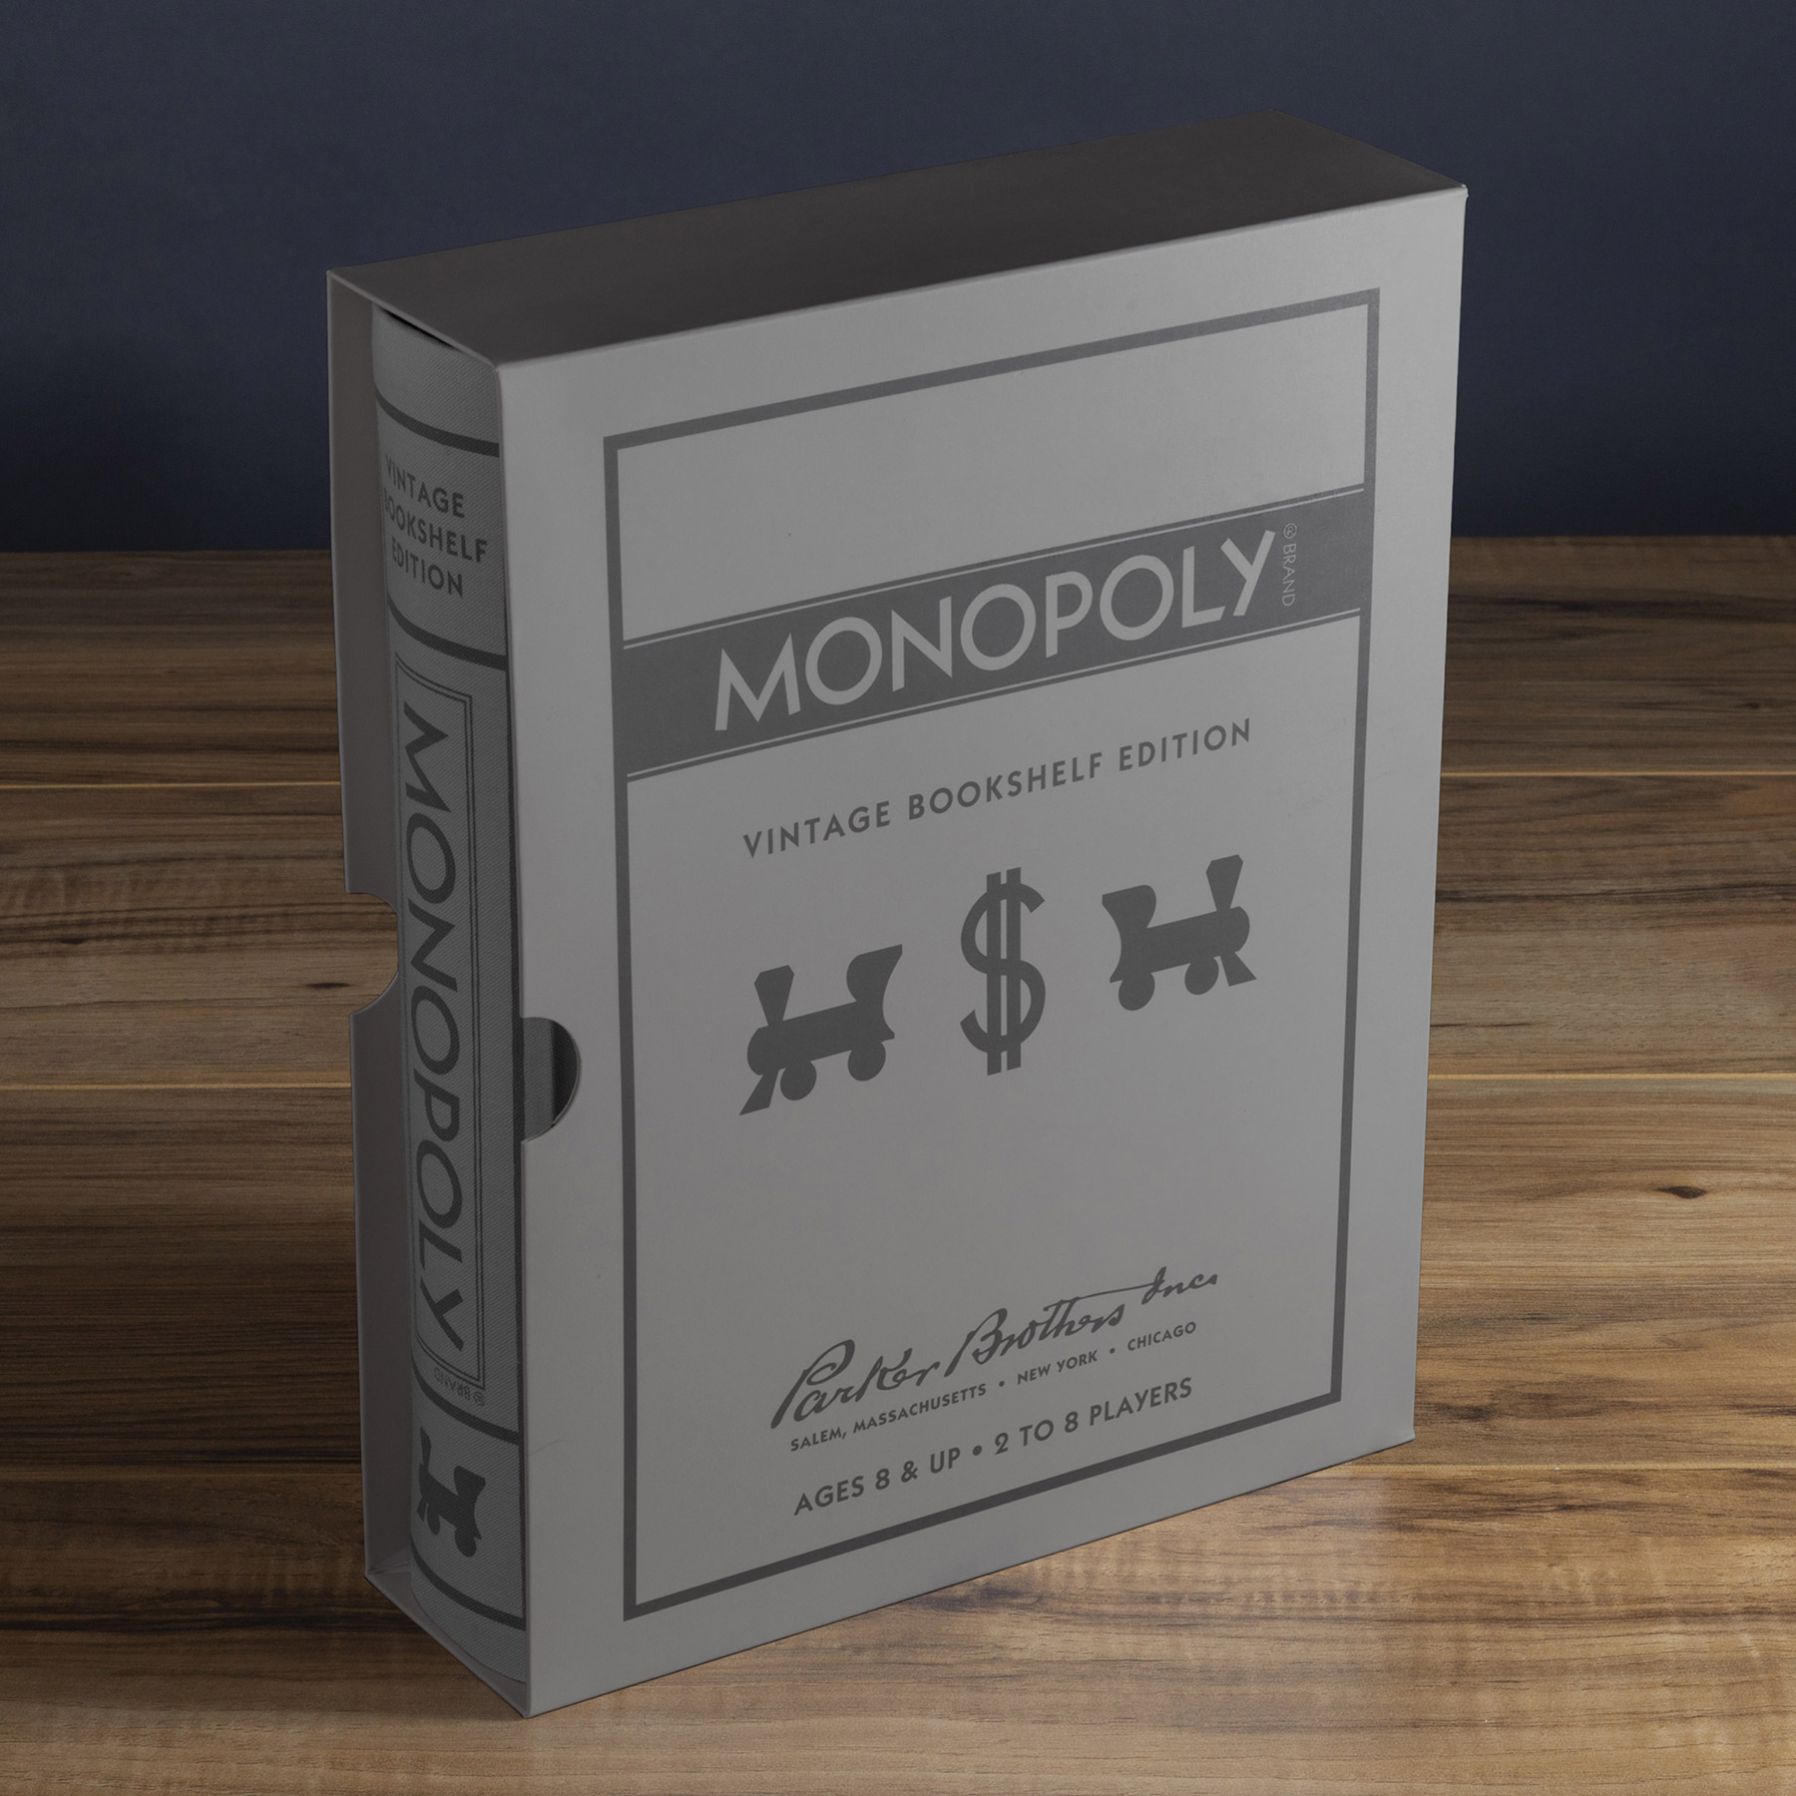 Details about   New MONOPOLY 2019 Vintage Library Bookshelf Game Collection Wooden Box SEALED 